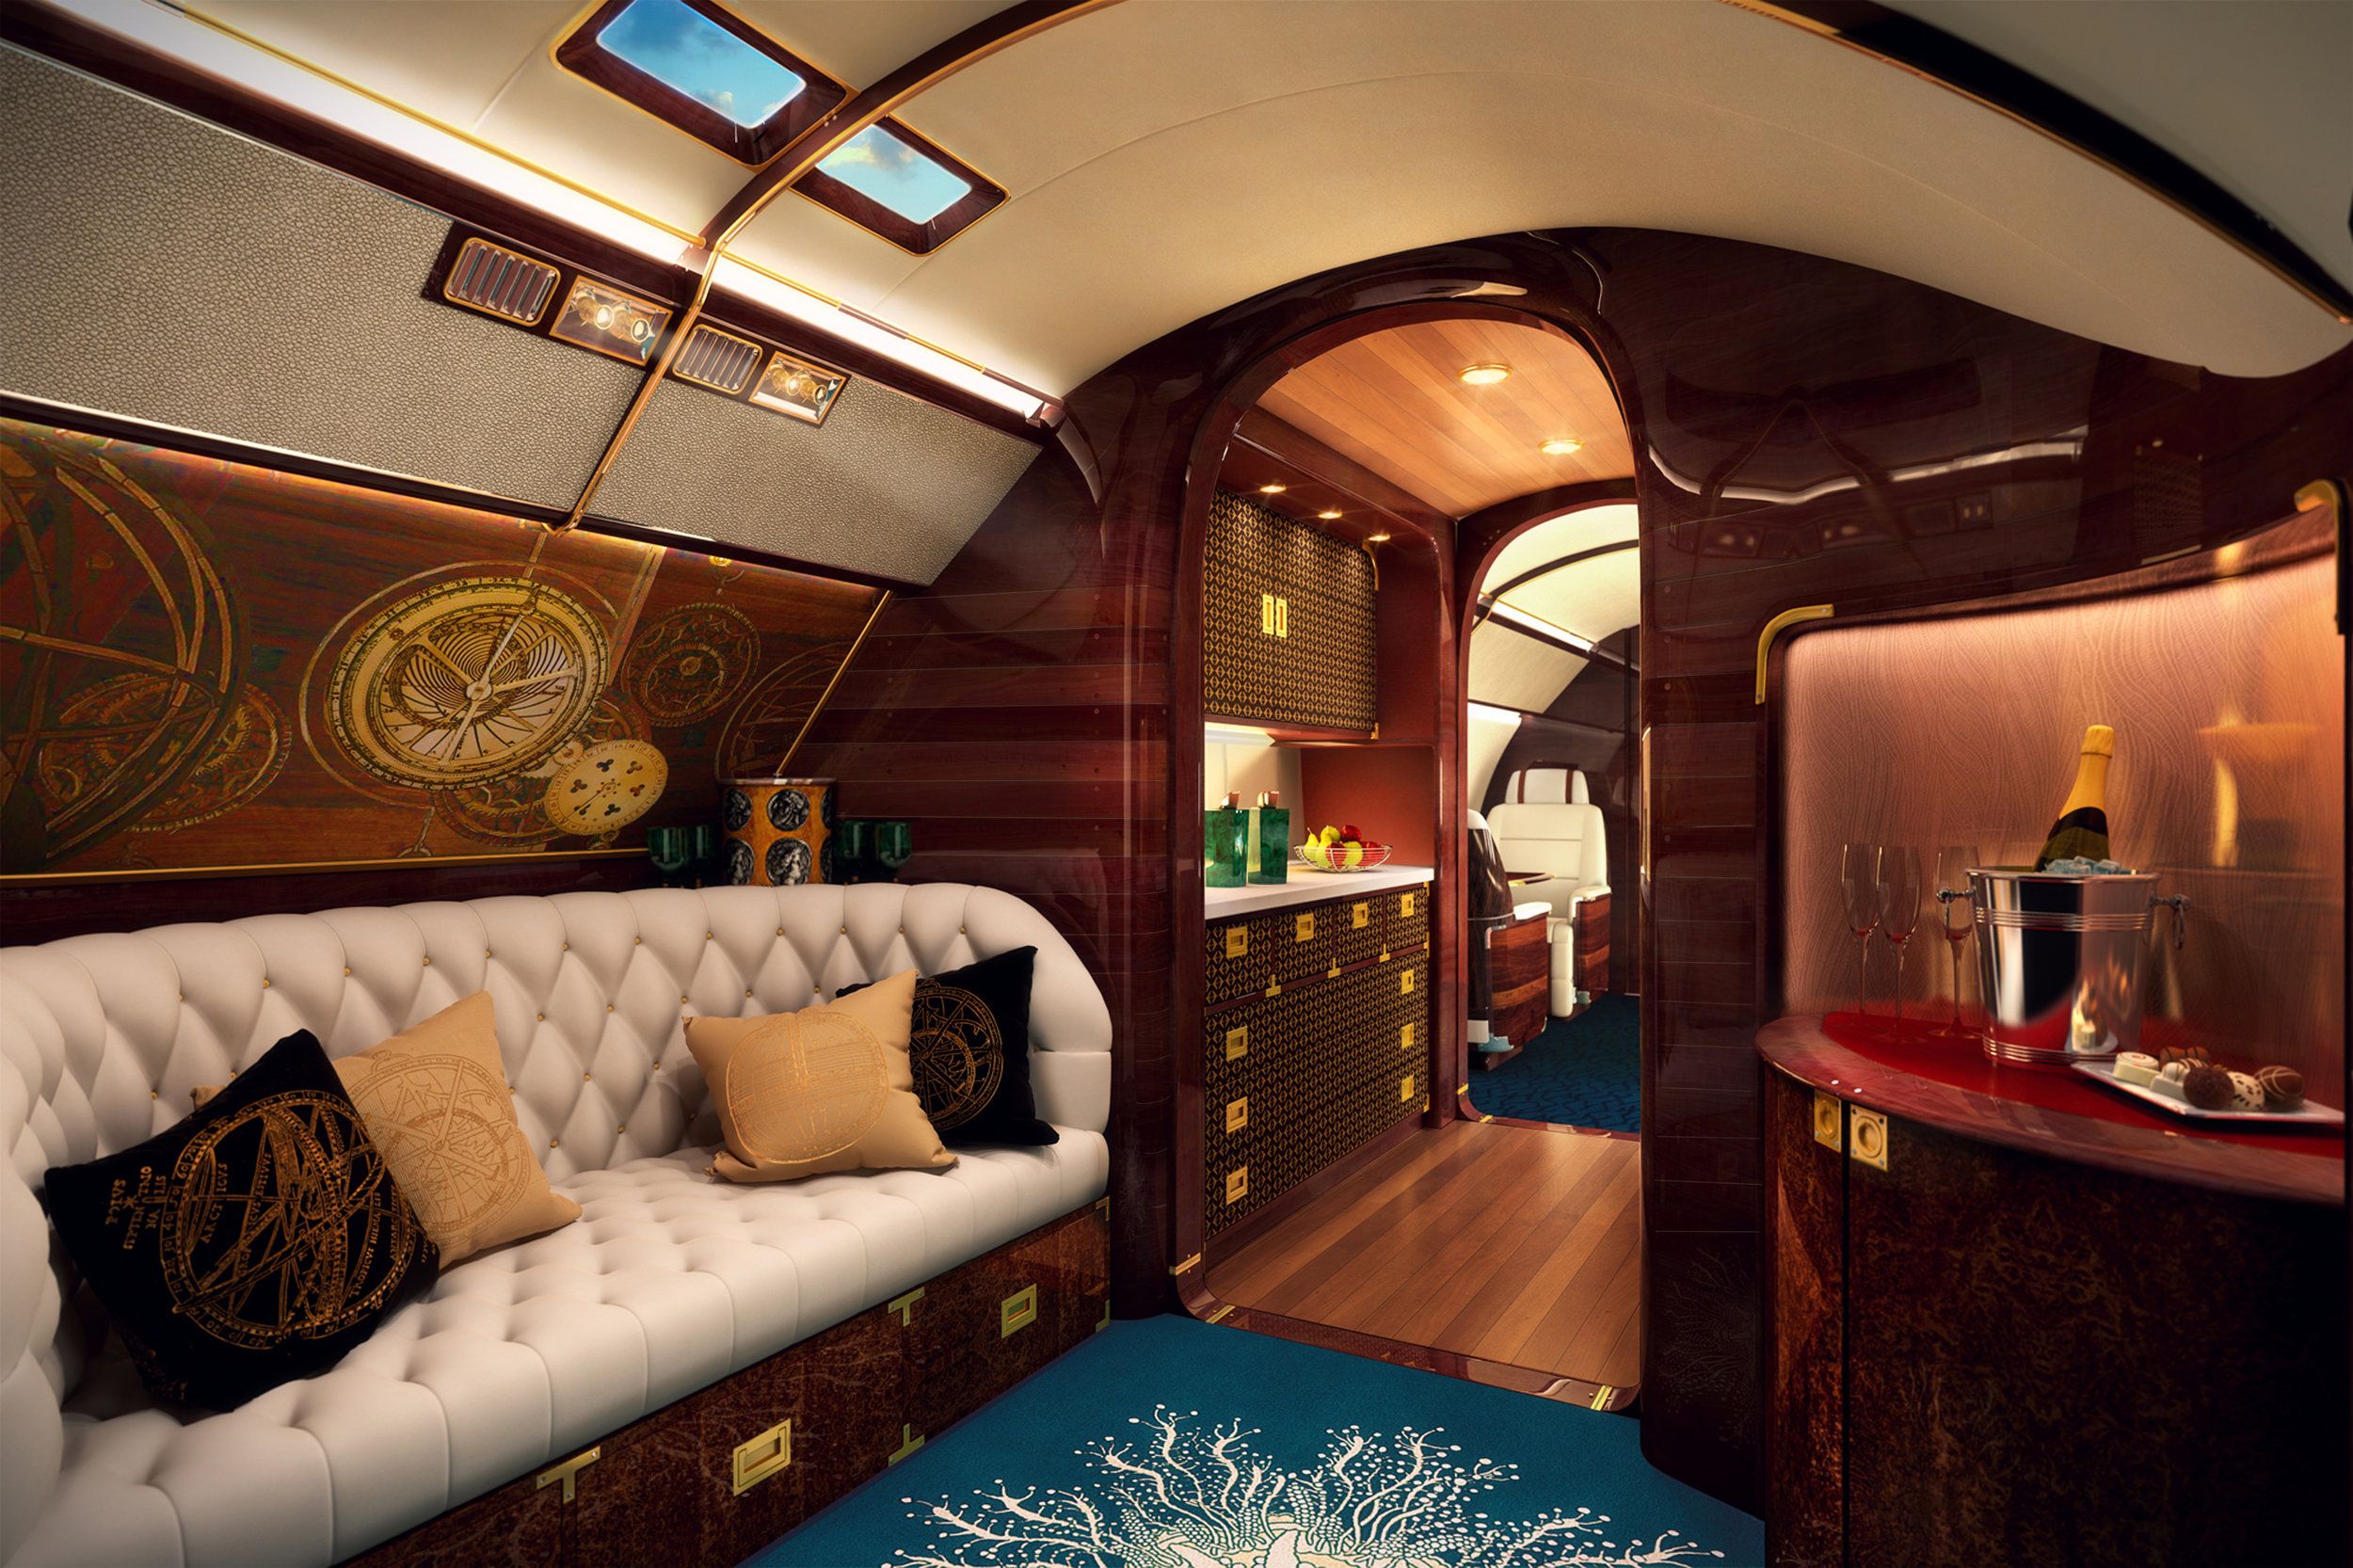 Inside the cabin of the Embraer Lineage 1000 Sky Yacht One.